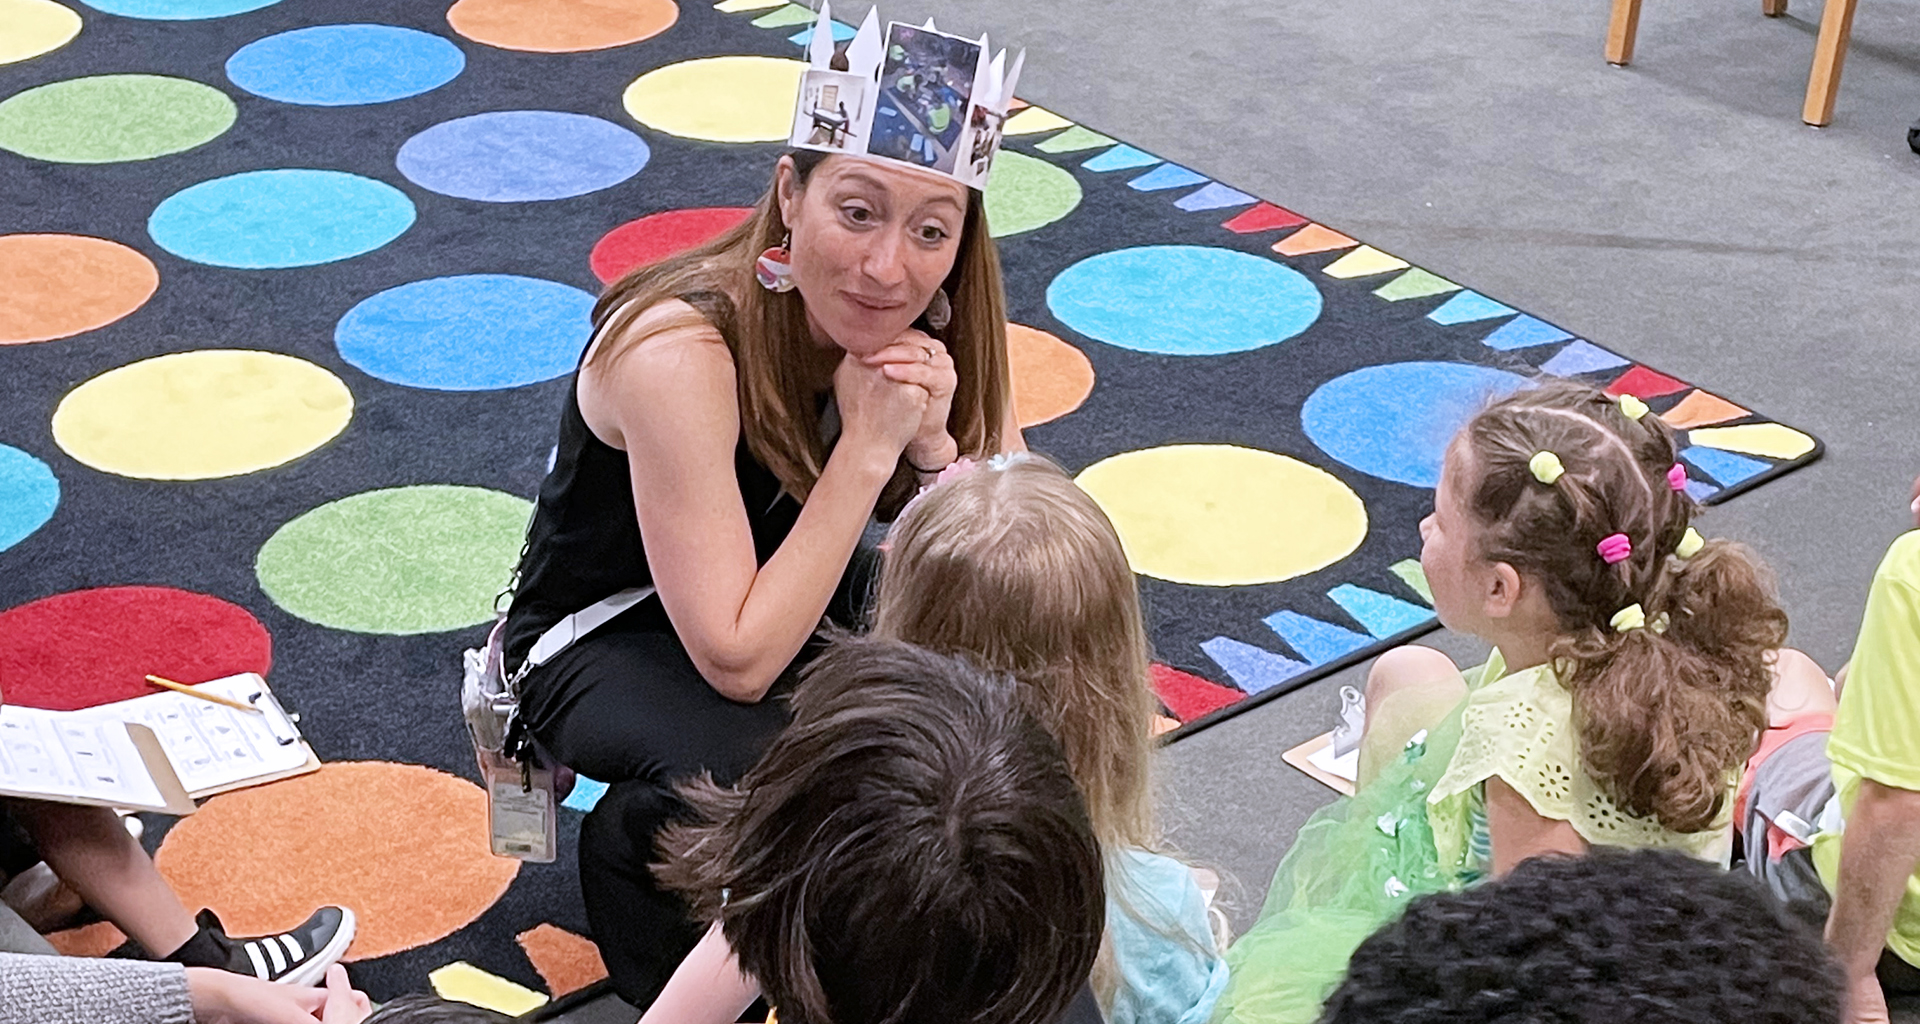 Teacher crouched down talking to students while wearing a paper crown.